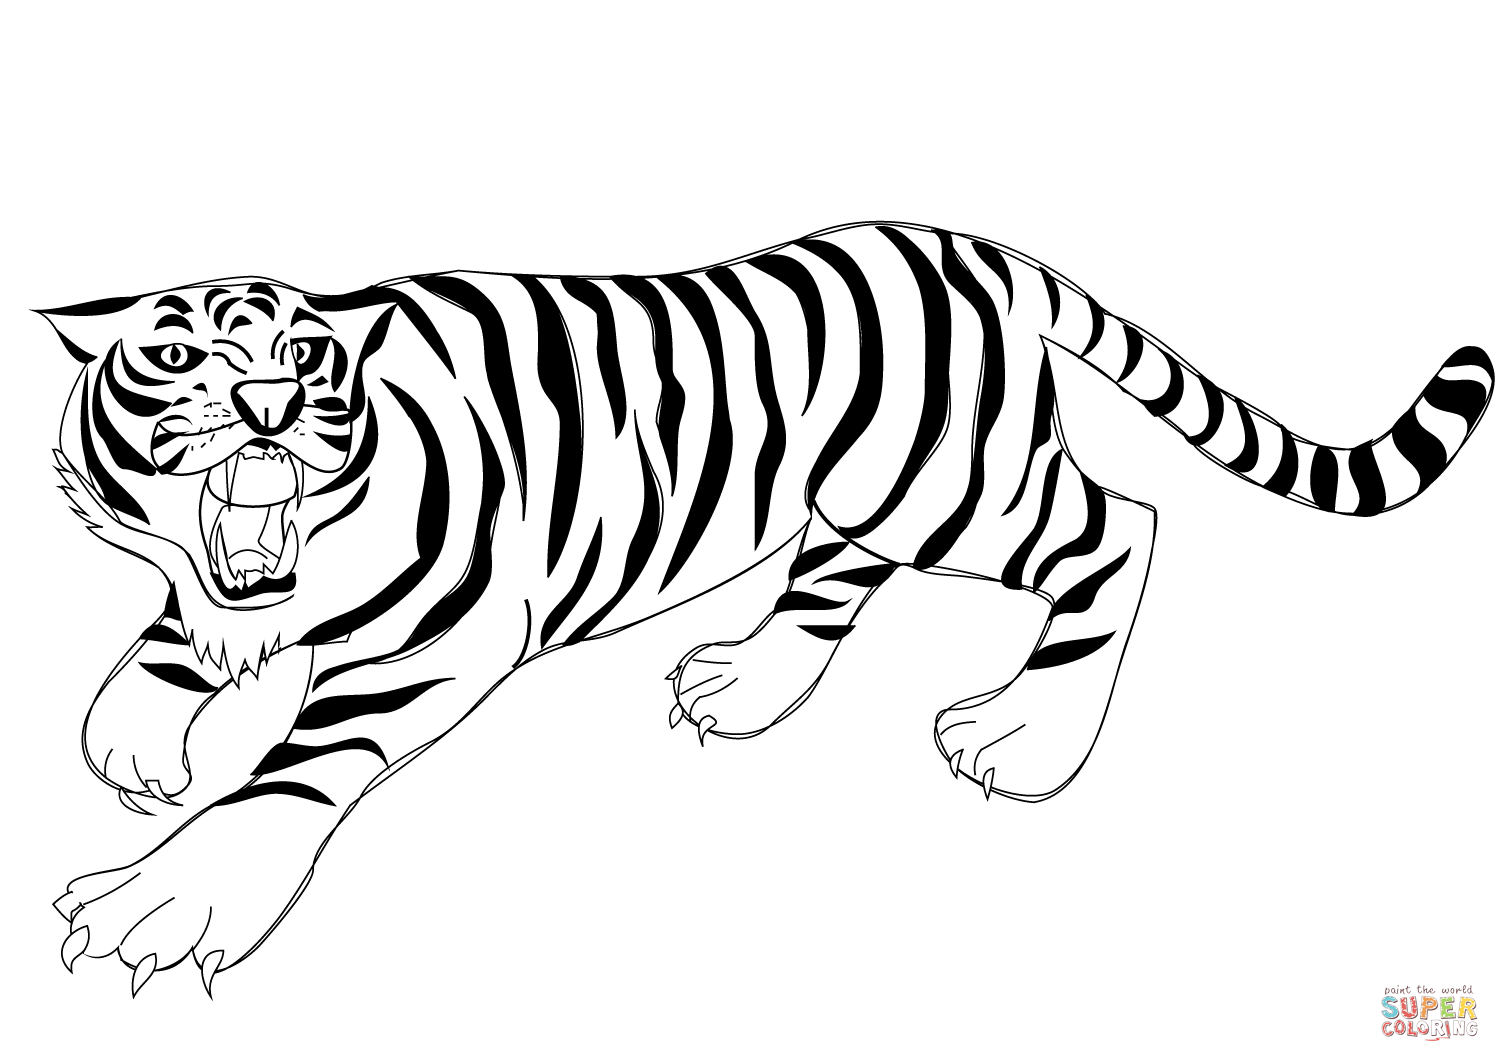 Roaring Tiger coloring page | Free Printable Coloring Pages